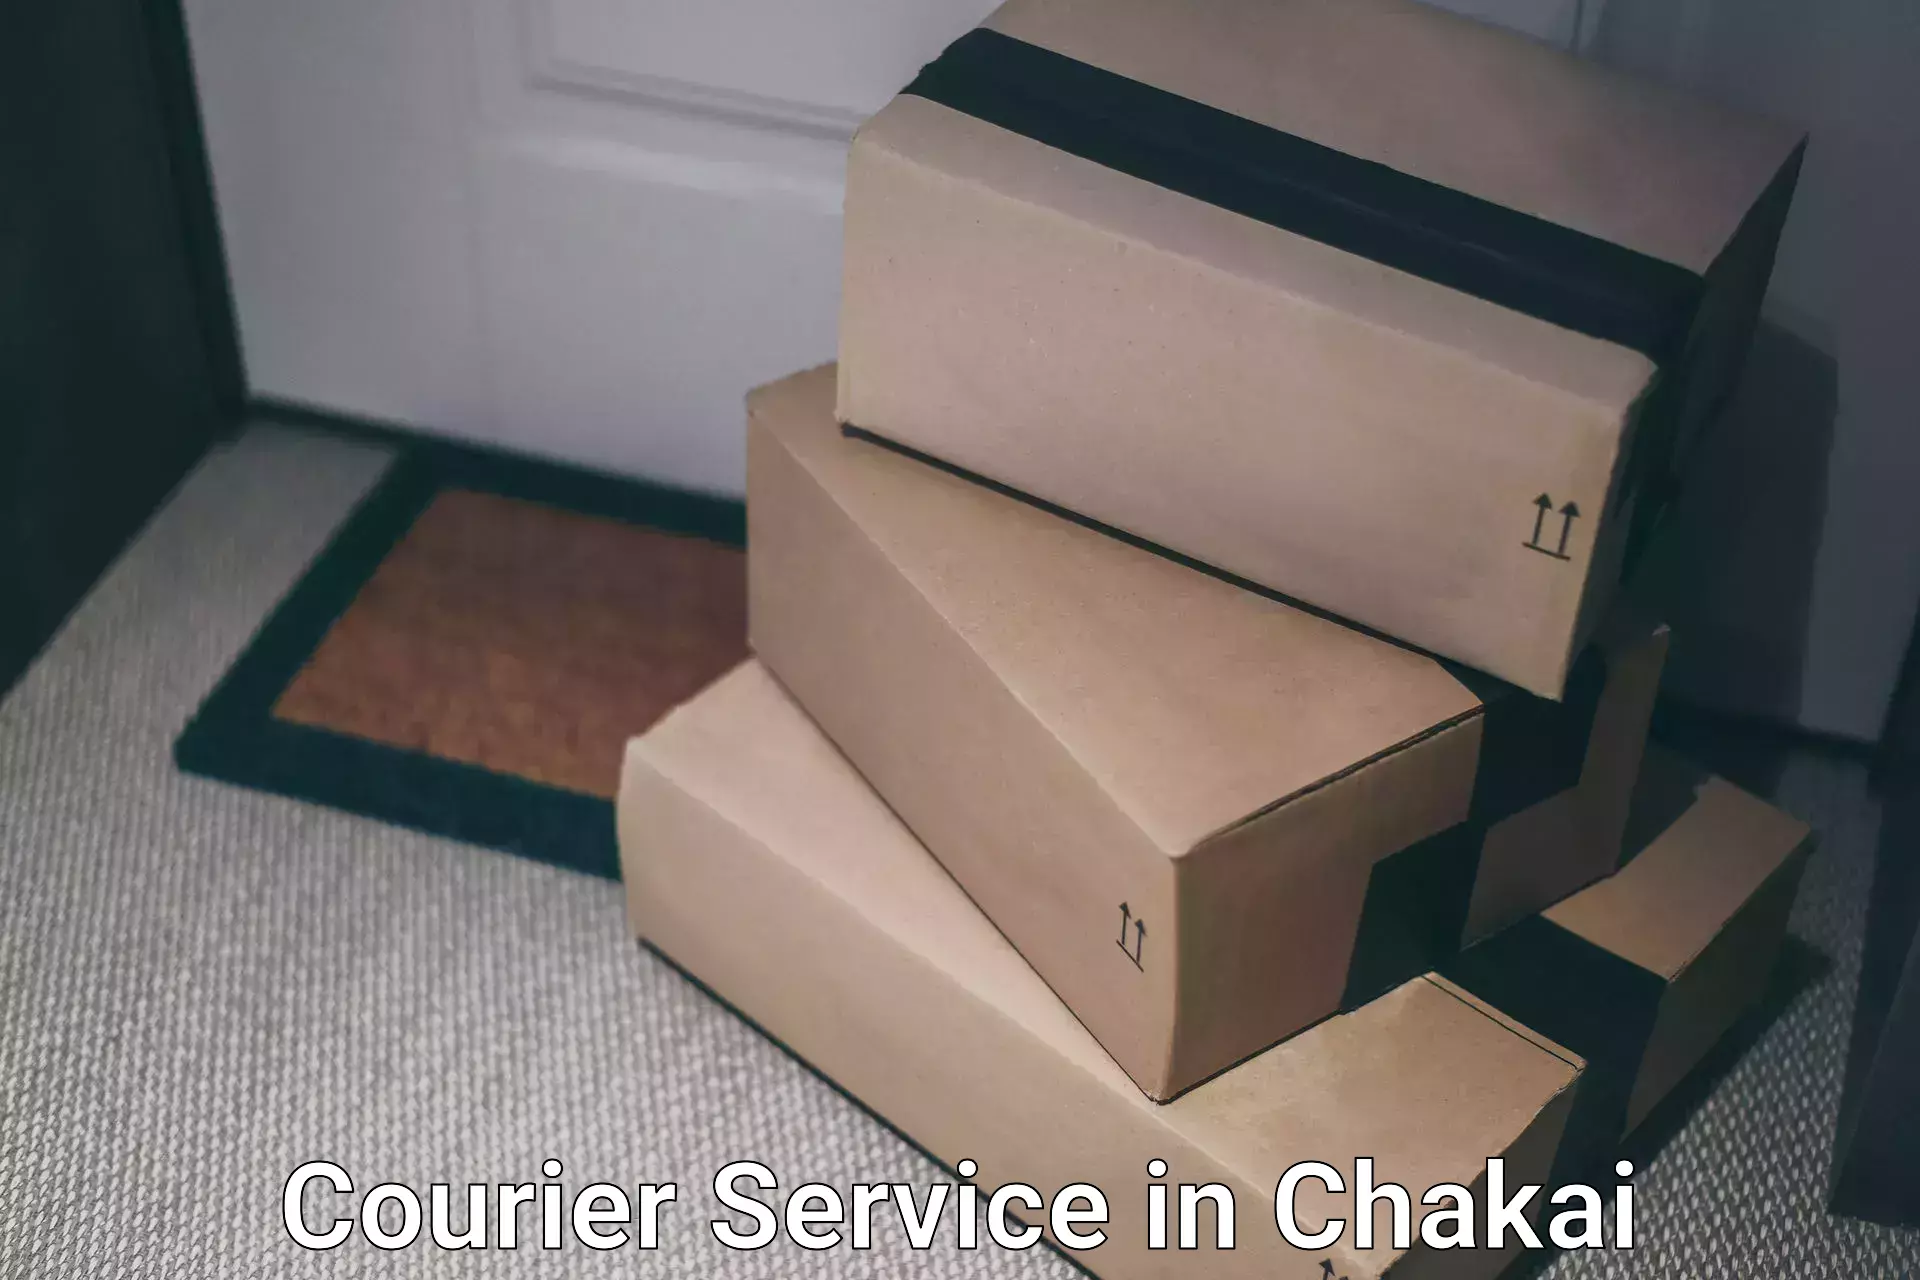 Secure shipping methods in Chakai